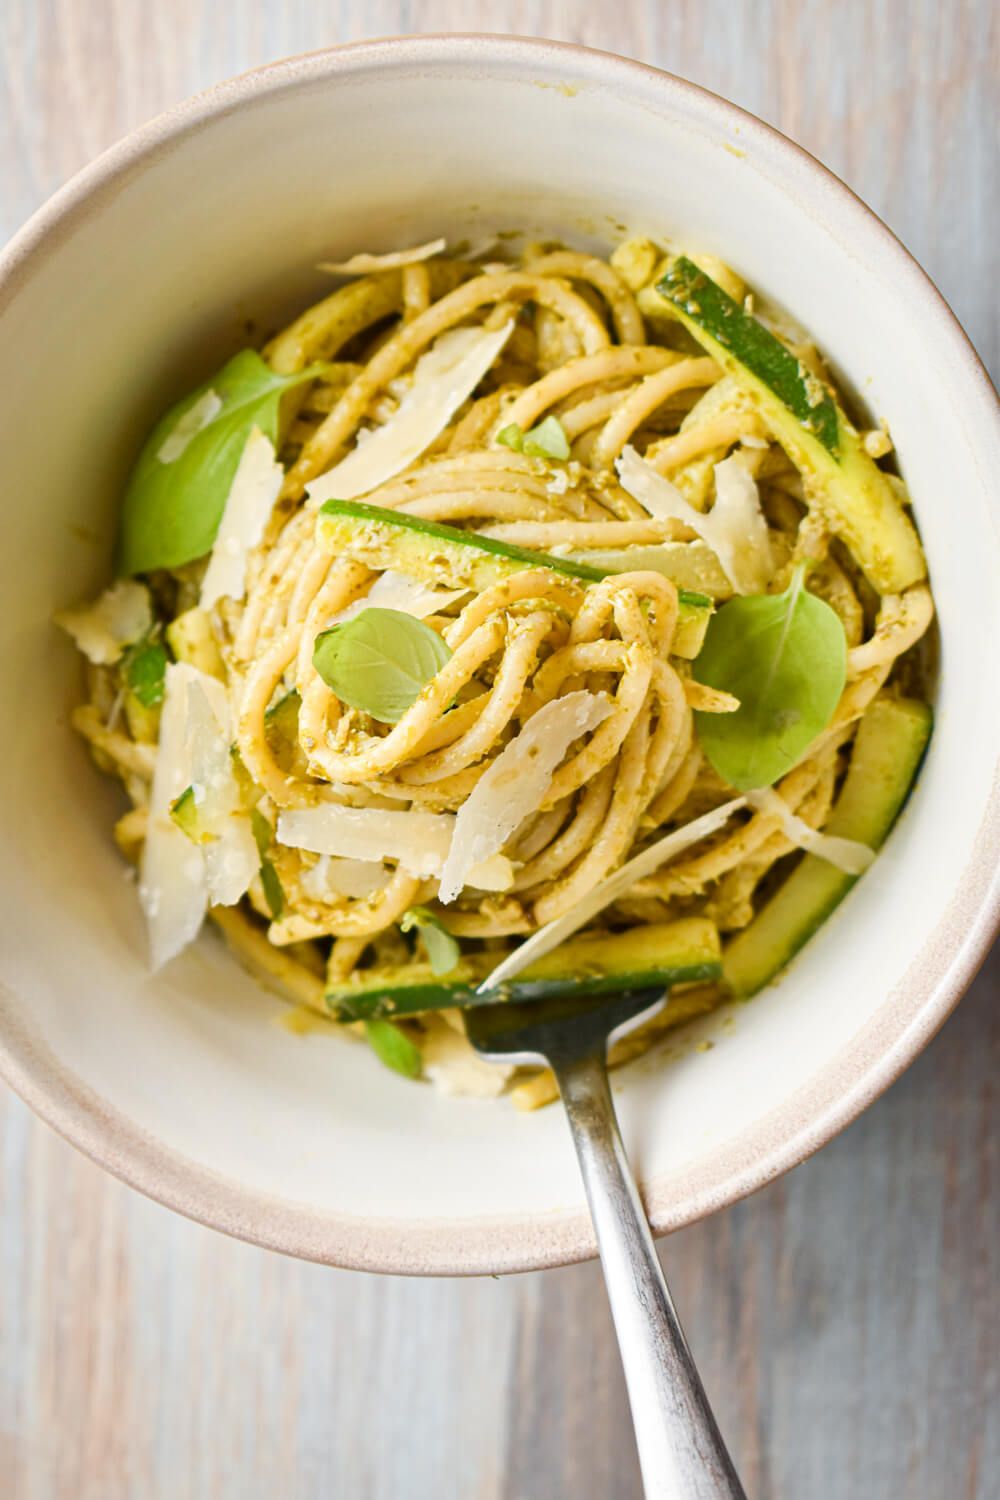 Pesto pasta with sliced zucchini, basil, and Parmesan cheese in a bowl.